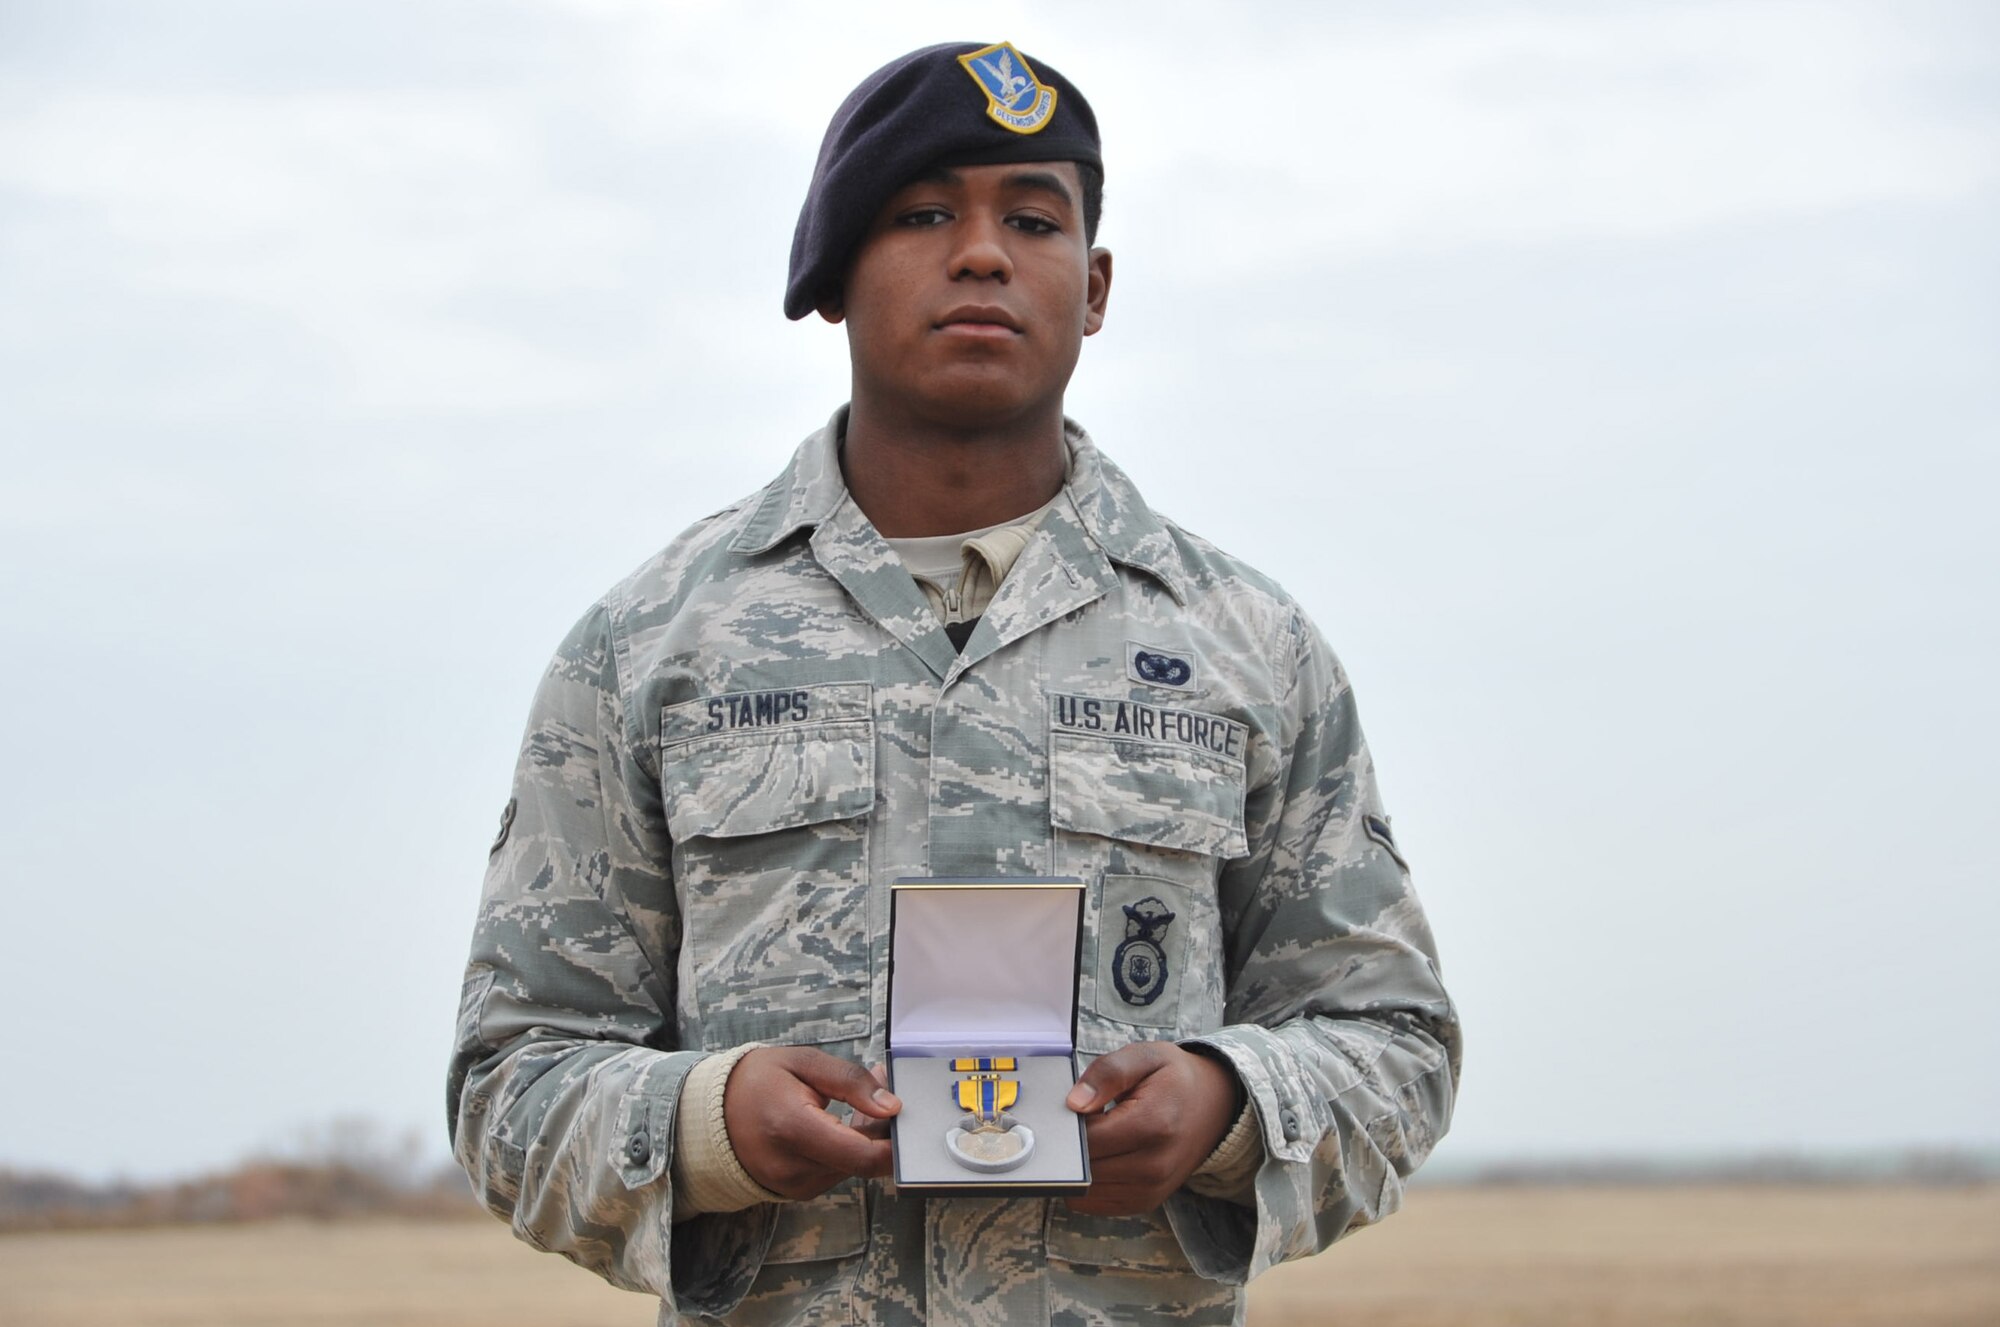 Airman Pauanthony Stamps, 82nd Security Forces Squadron entry controller, was presented an Air Force Commendation Medal Nov. 20, 2014, on Sheppard Air Force Base, Texas, for an act of courage. Stamps and a fellow wingman disarmed a highly intoxicated Airman at a party who was threatening the lives of those around him. 

